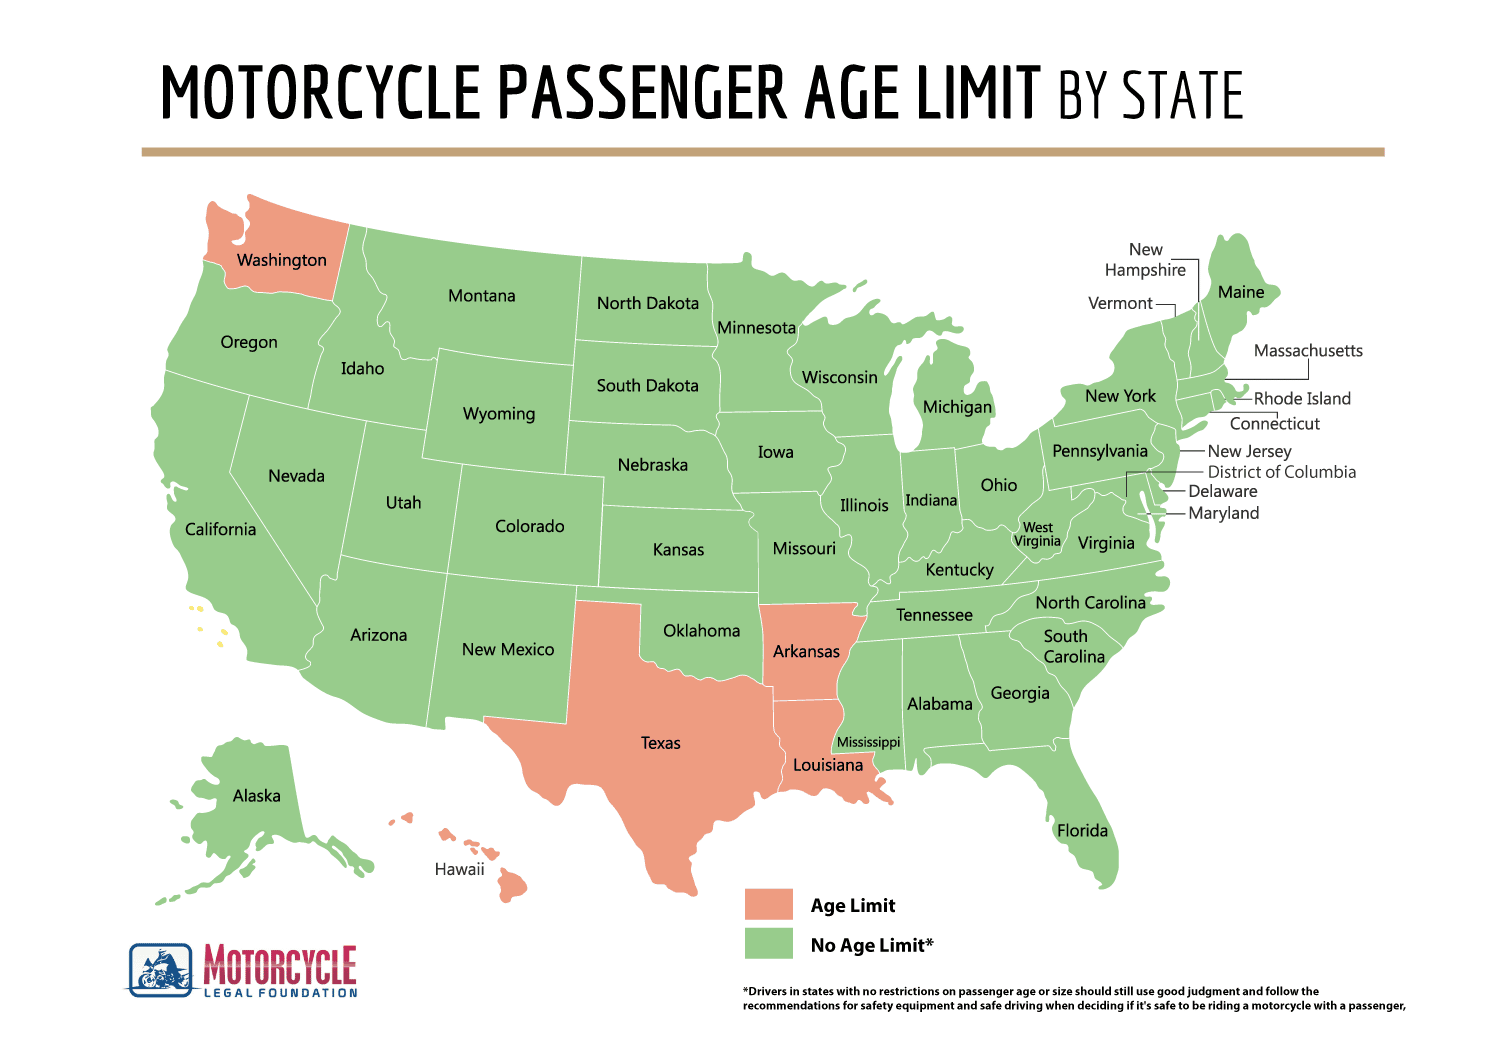 map showing motorcycle passenger age limit per state